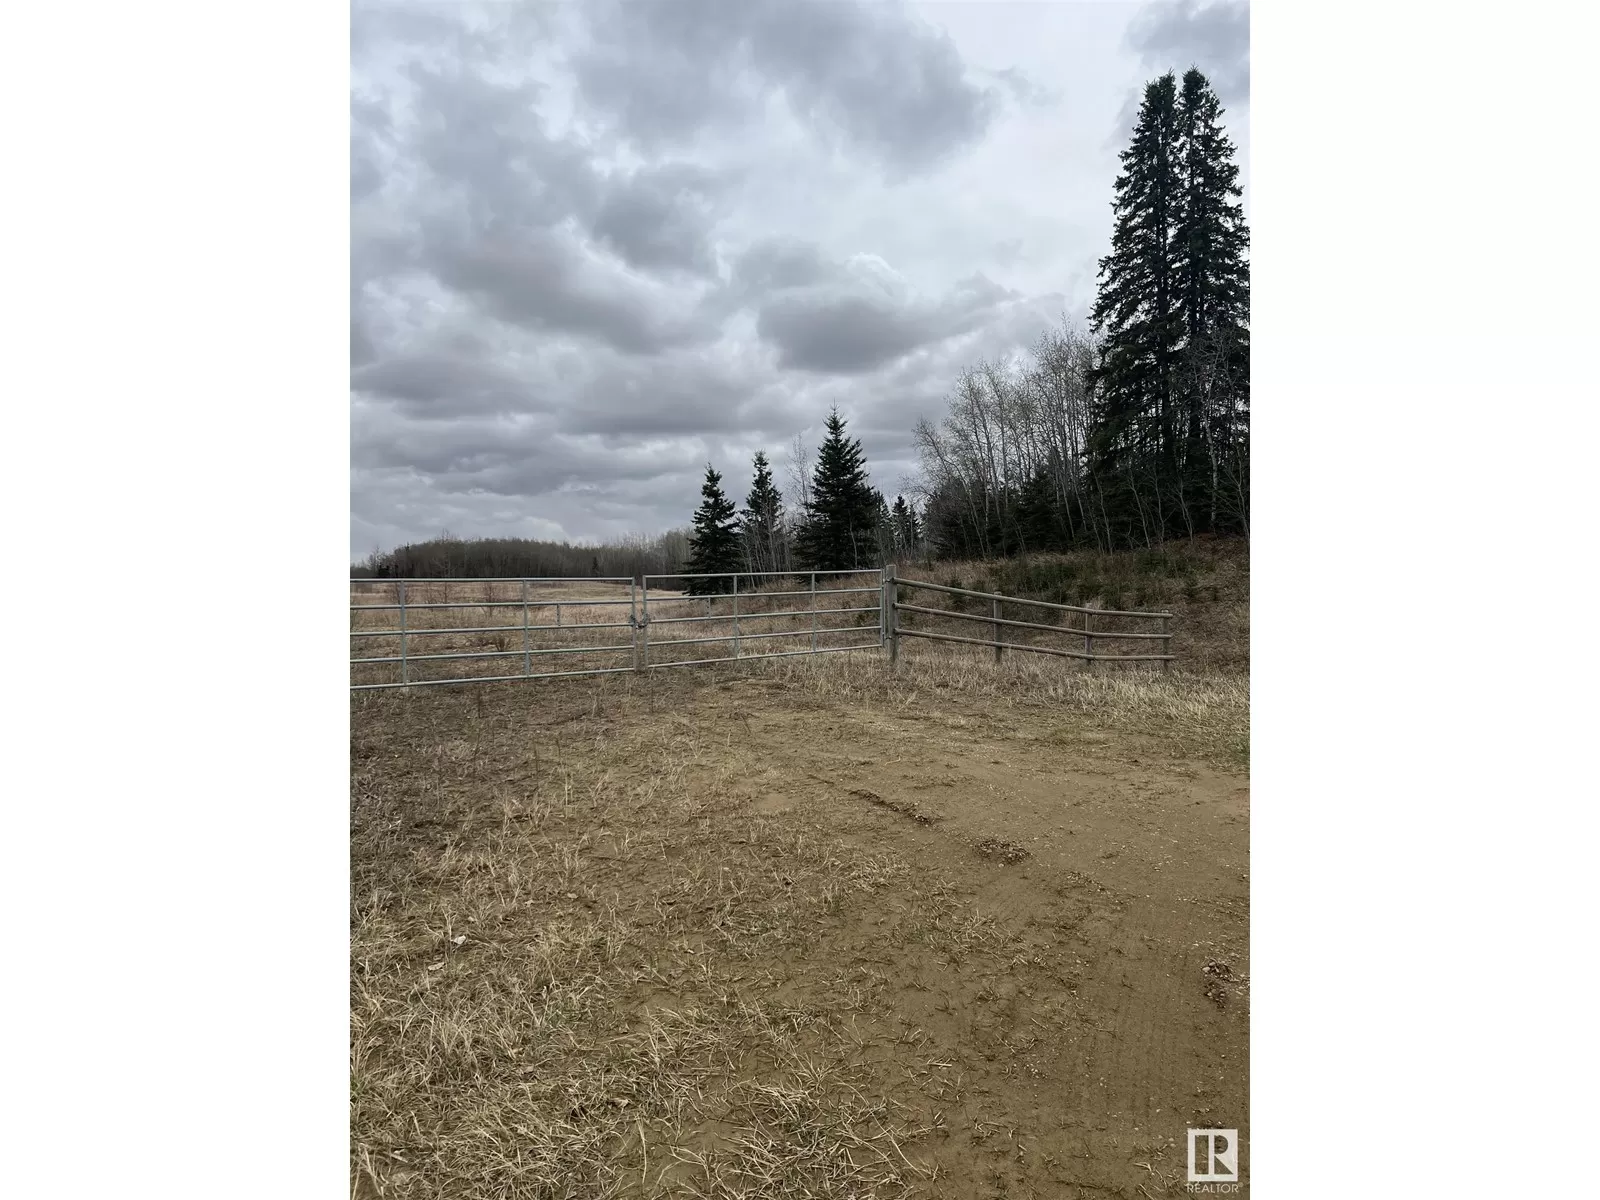 No Building for rent: Nw 14-47-24-4, Rural Wetaskiwin County, Alberta T0C 1Z0